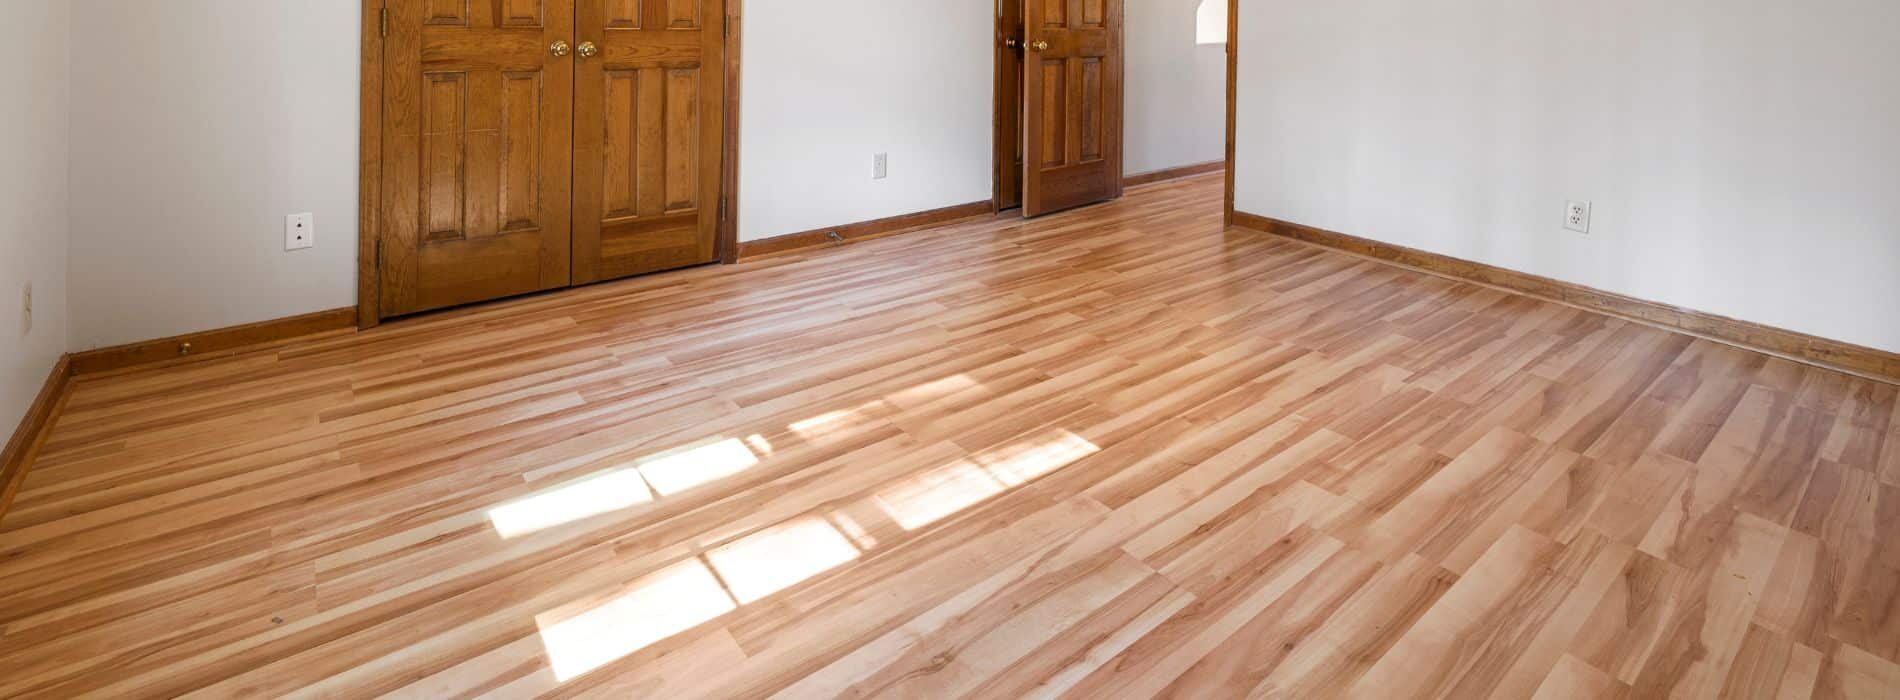 Expertly restored 6 year old hardwood floor in Cheam, SM3. Mr Sander® used Bona 2.2K Frost whitewashing and Traffic HD 16% sheen matte lacquer. Durable and stunning, this finish guarantees long-lasting beauty.